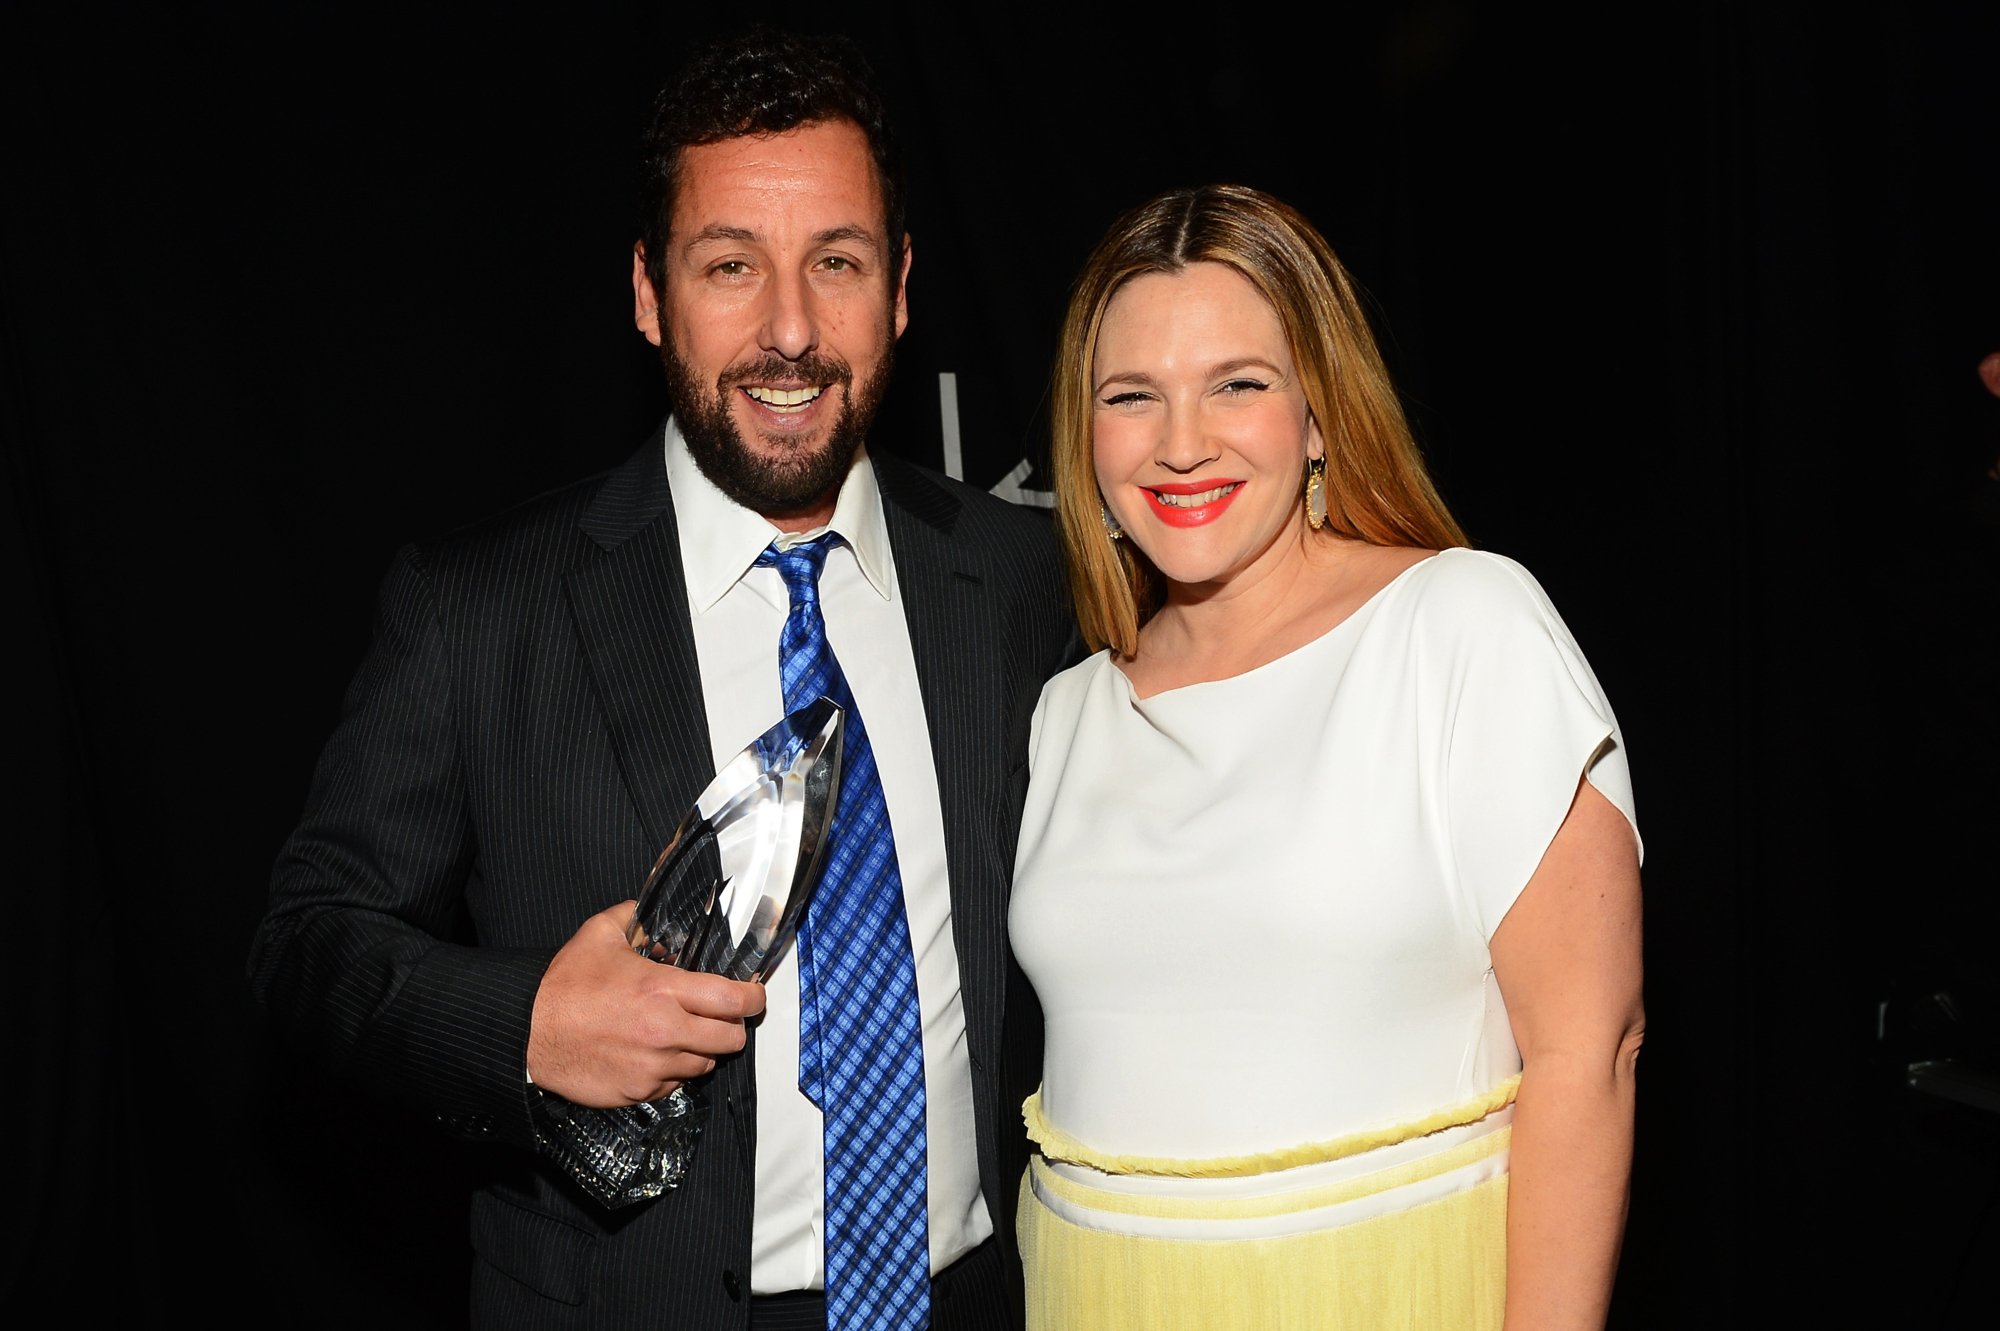 Adam Sandler and Drew Barrymore, who co-starred in 'The Wedding Singer' smiling with Sandler holding a People's Choice Award